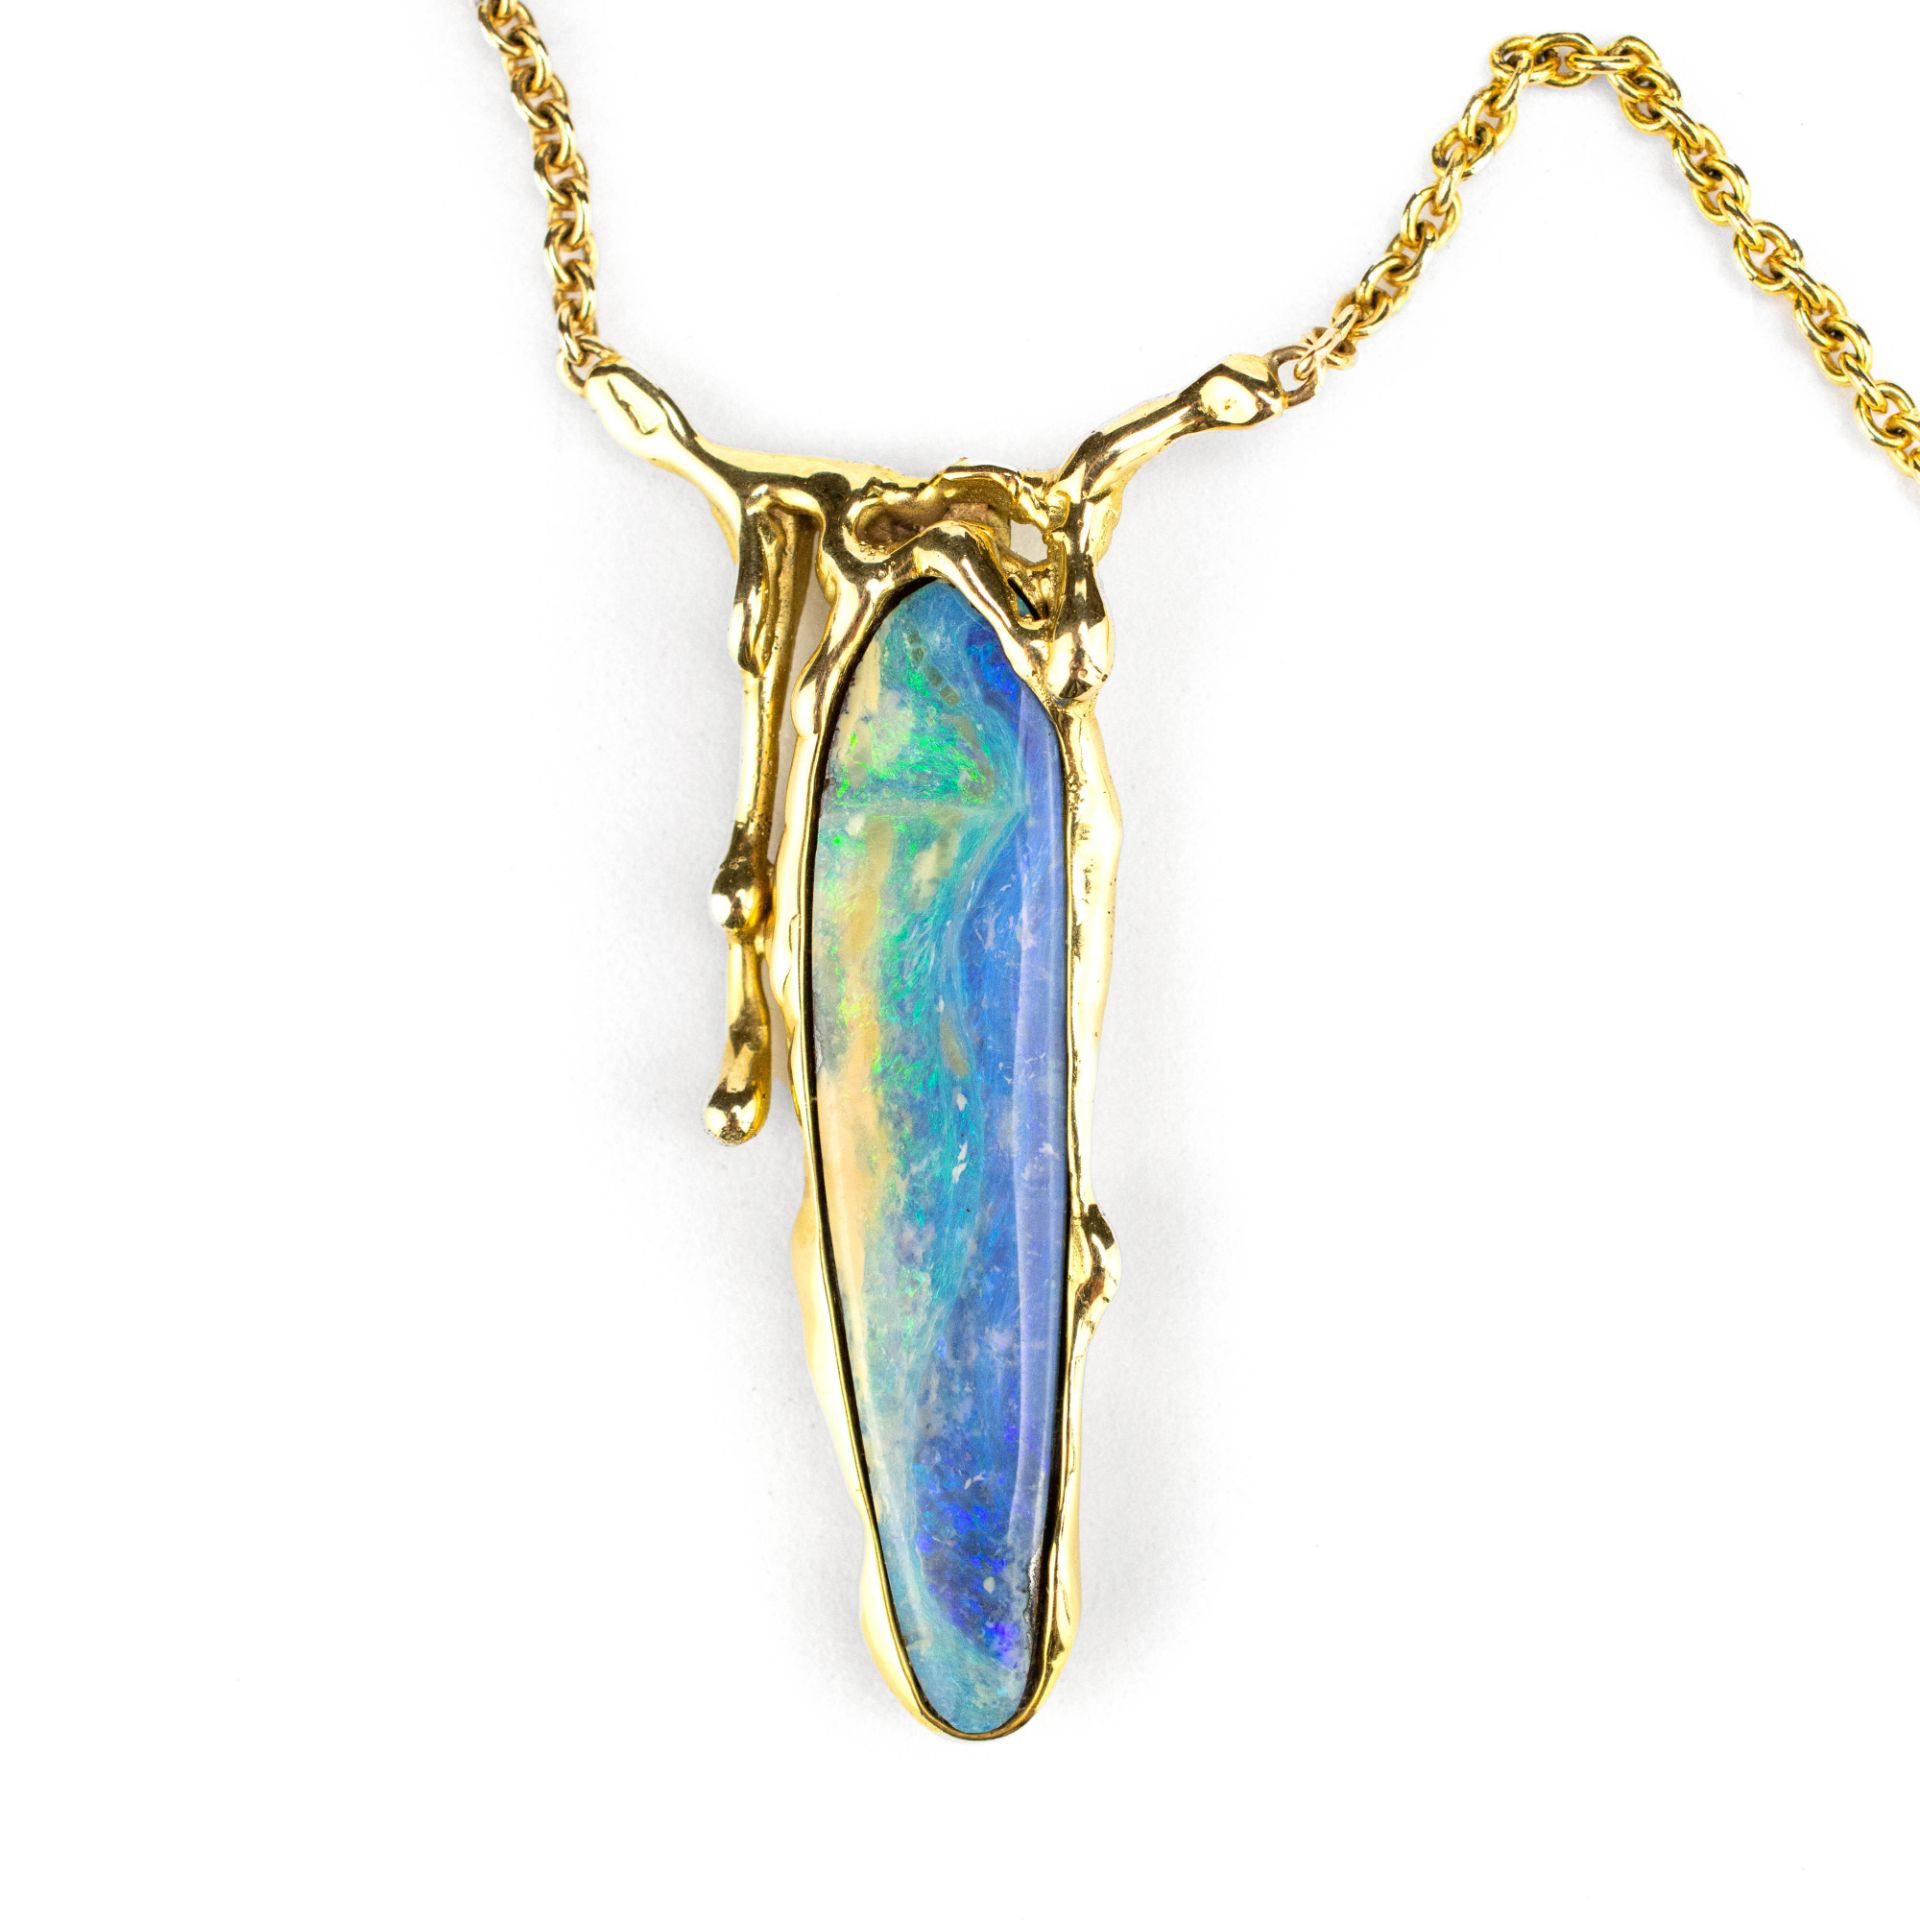 Collier mit Opal - Image 2 of 4